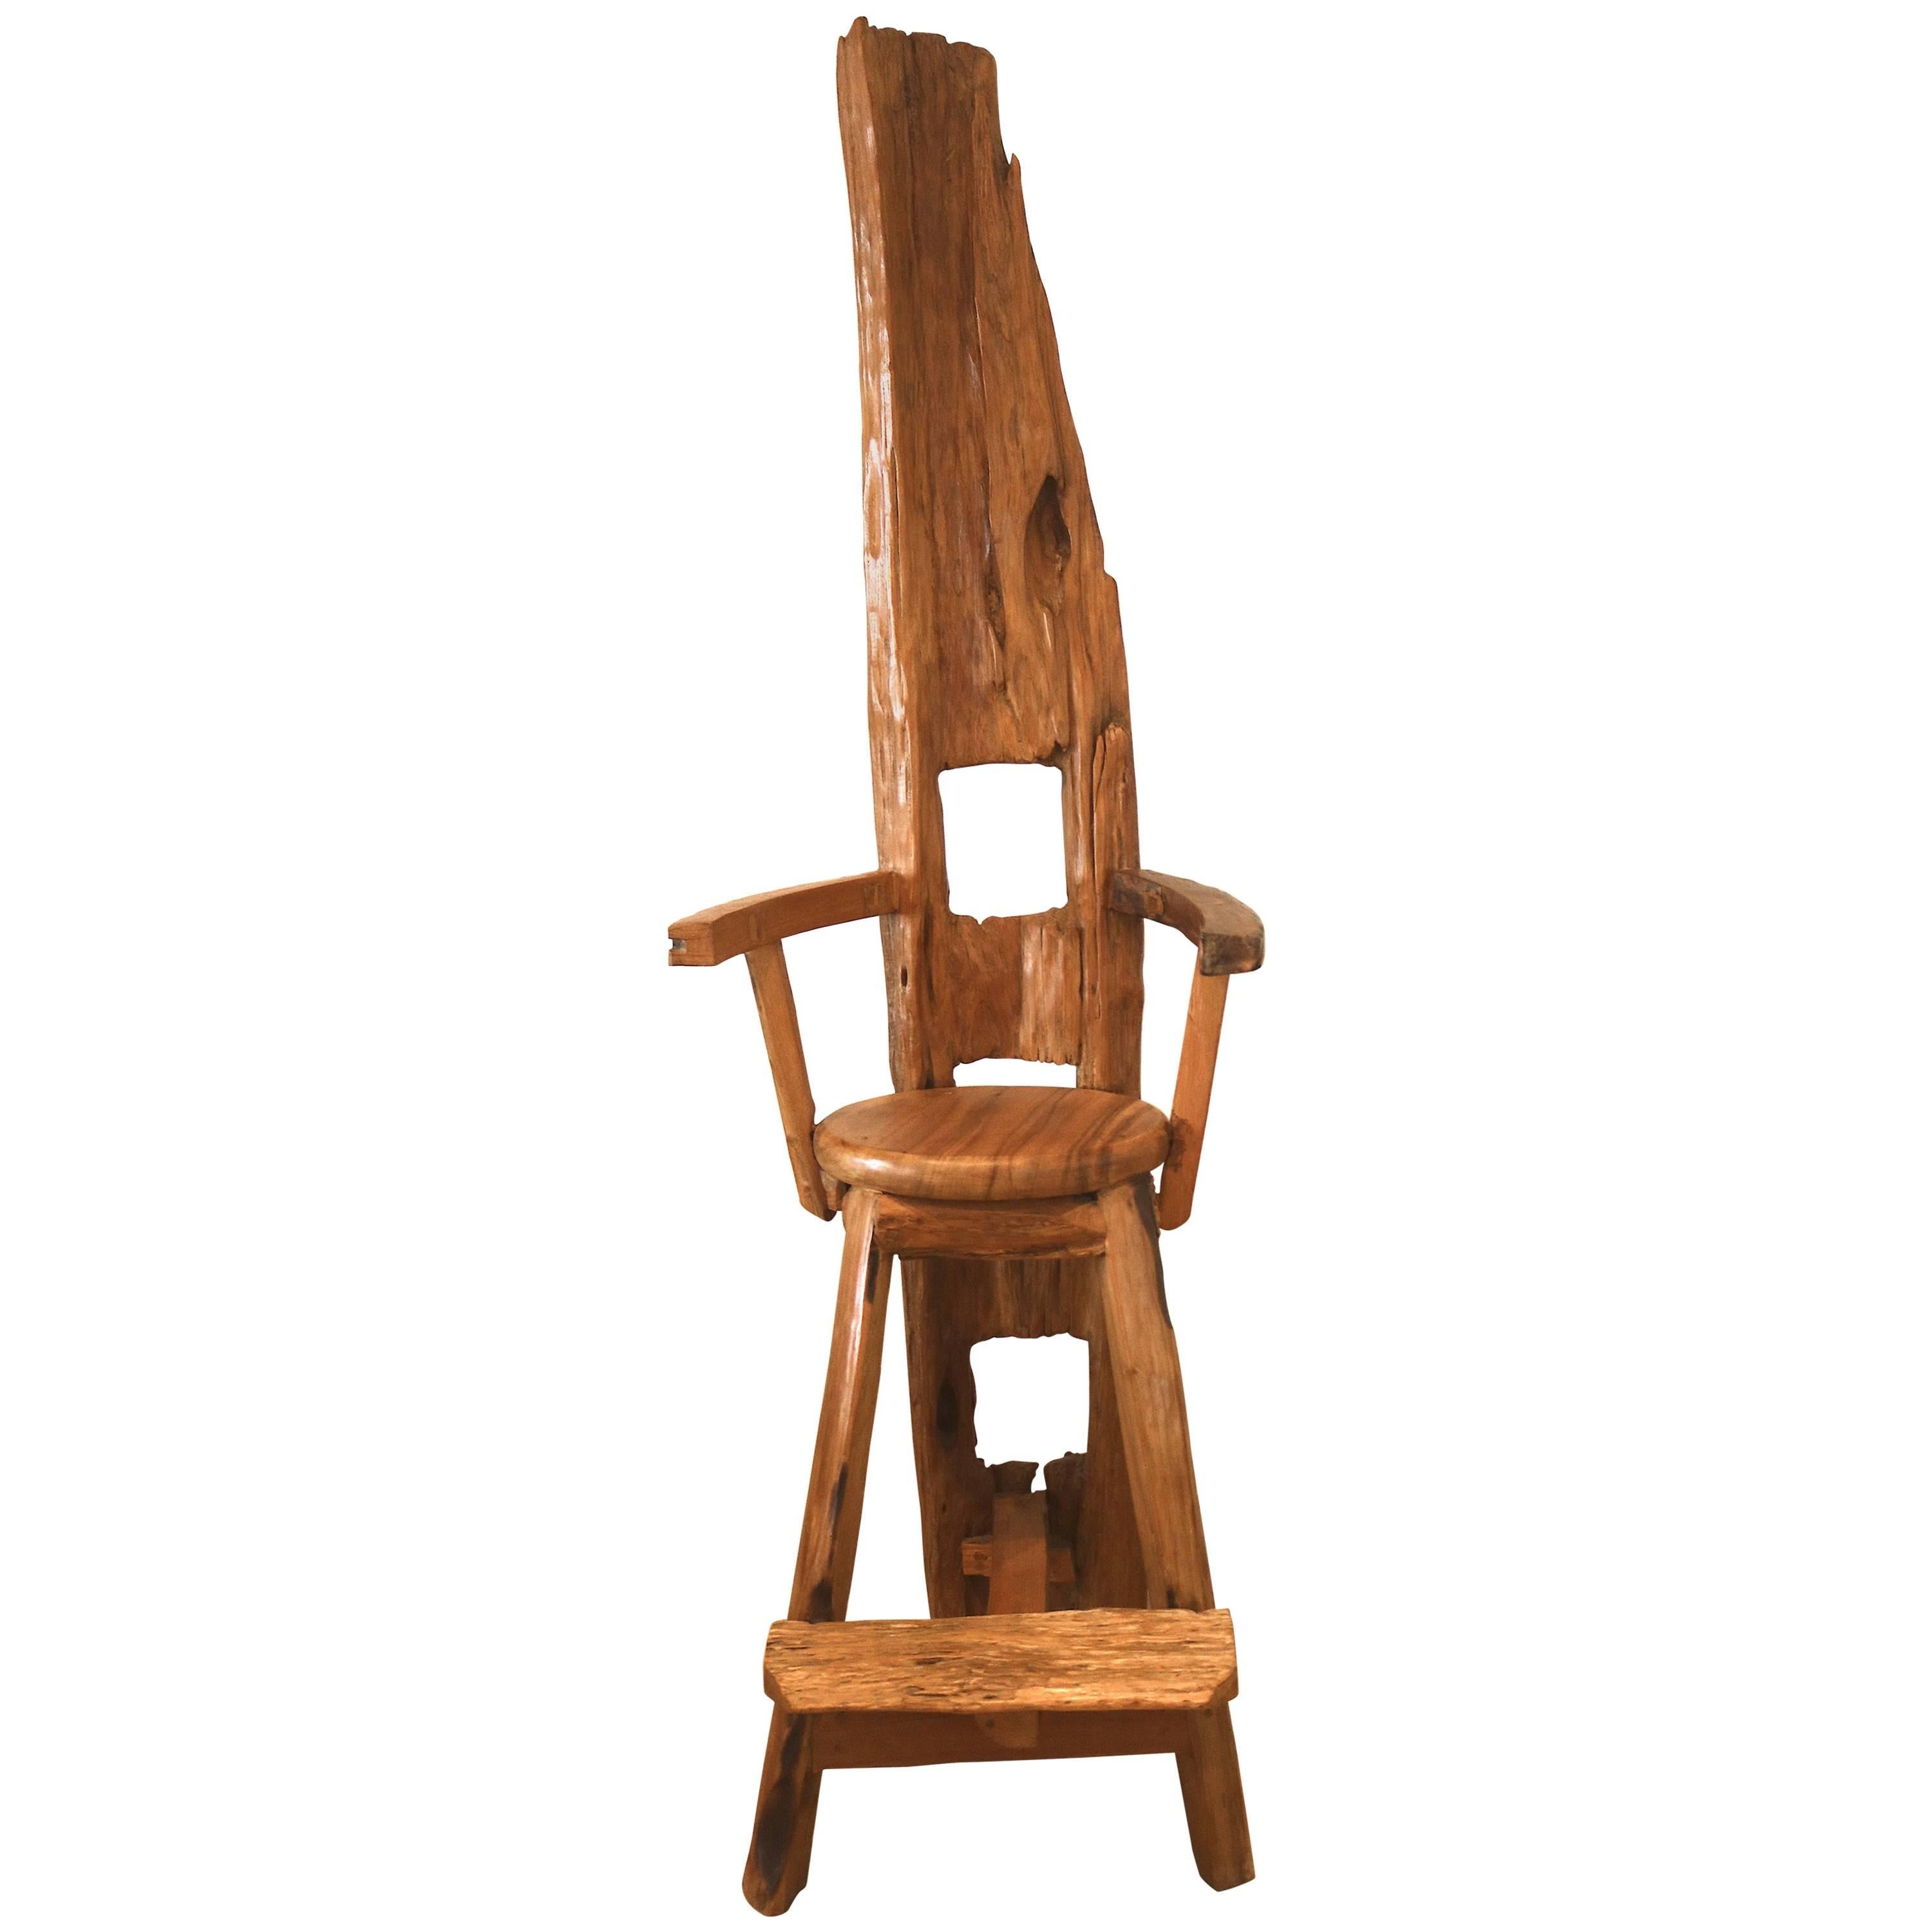 77" High Artisan Wood Throne Arm Chair-one of a Kind Art Sculpture For Sale